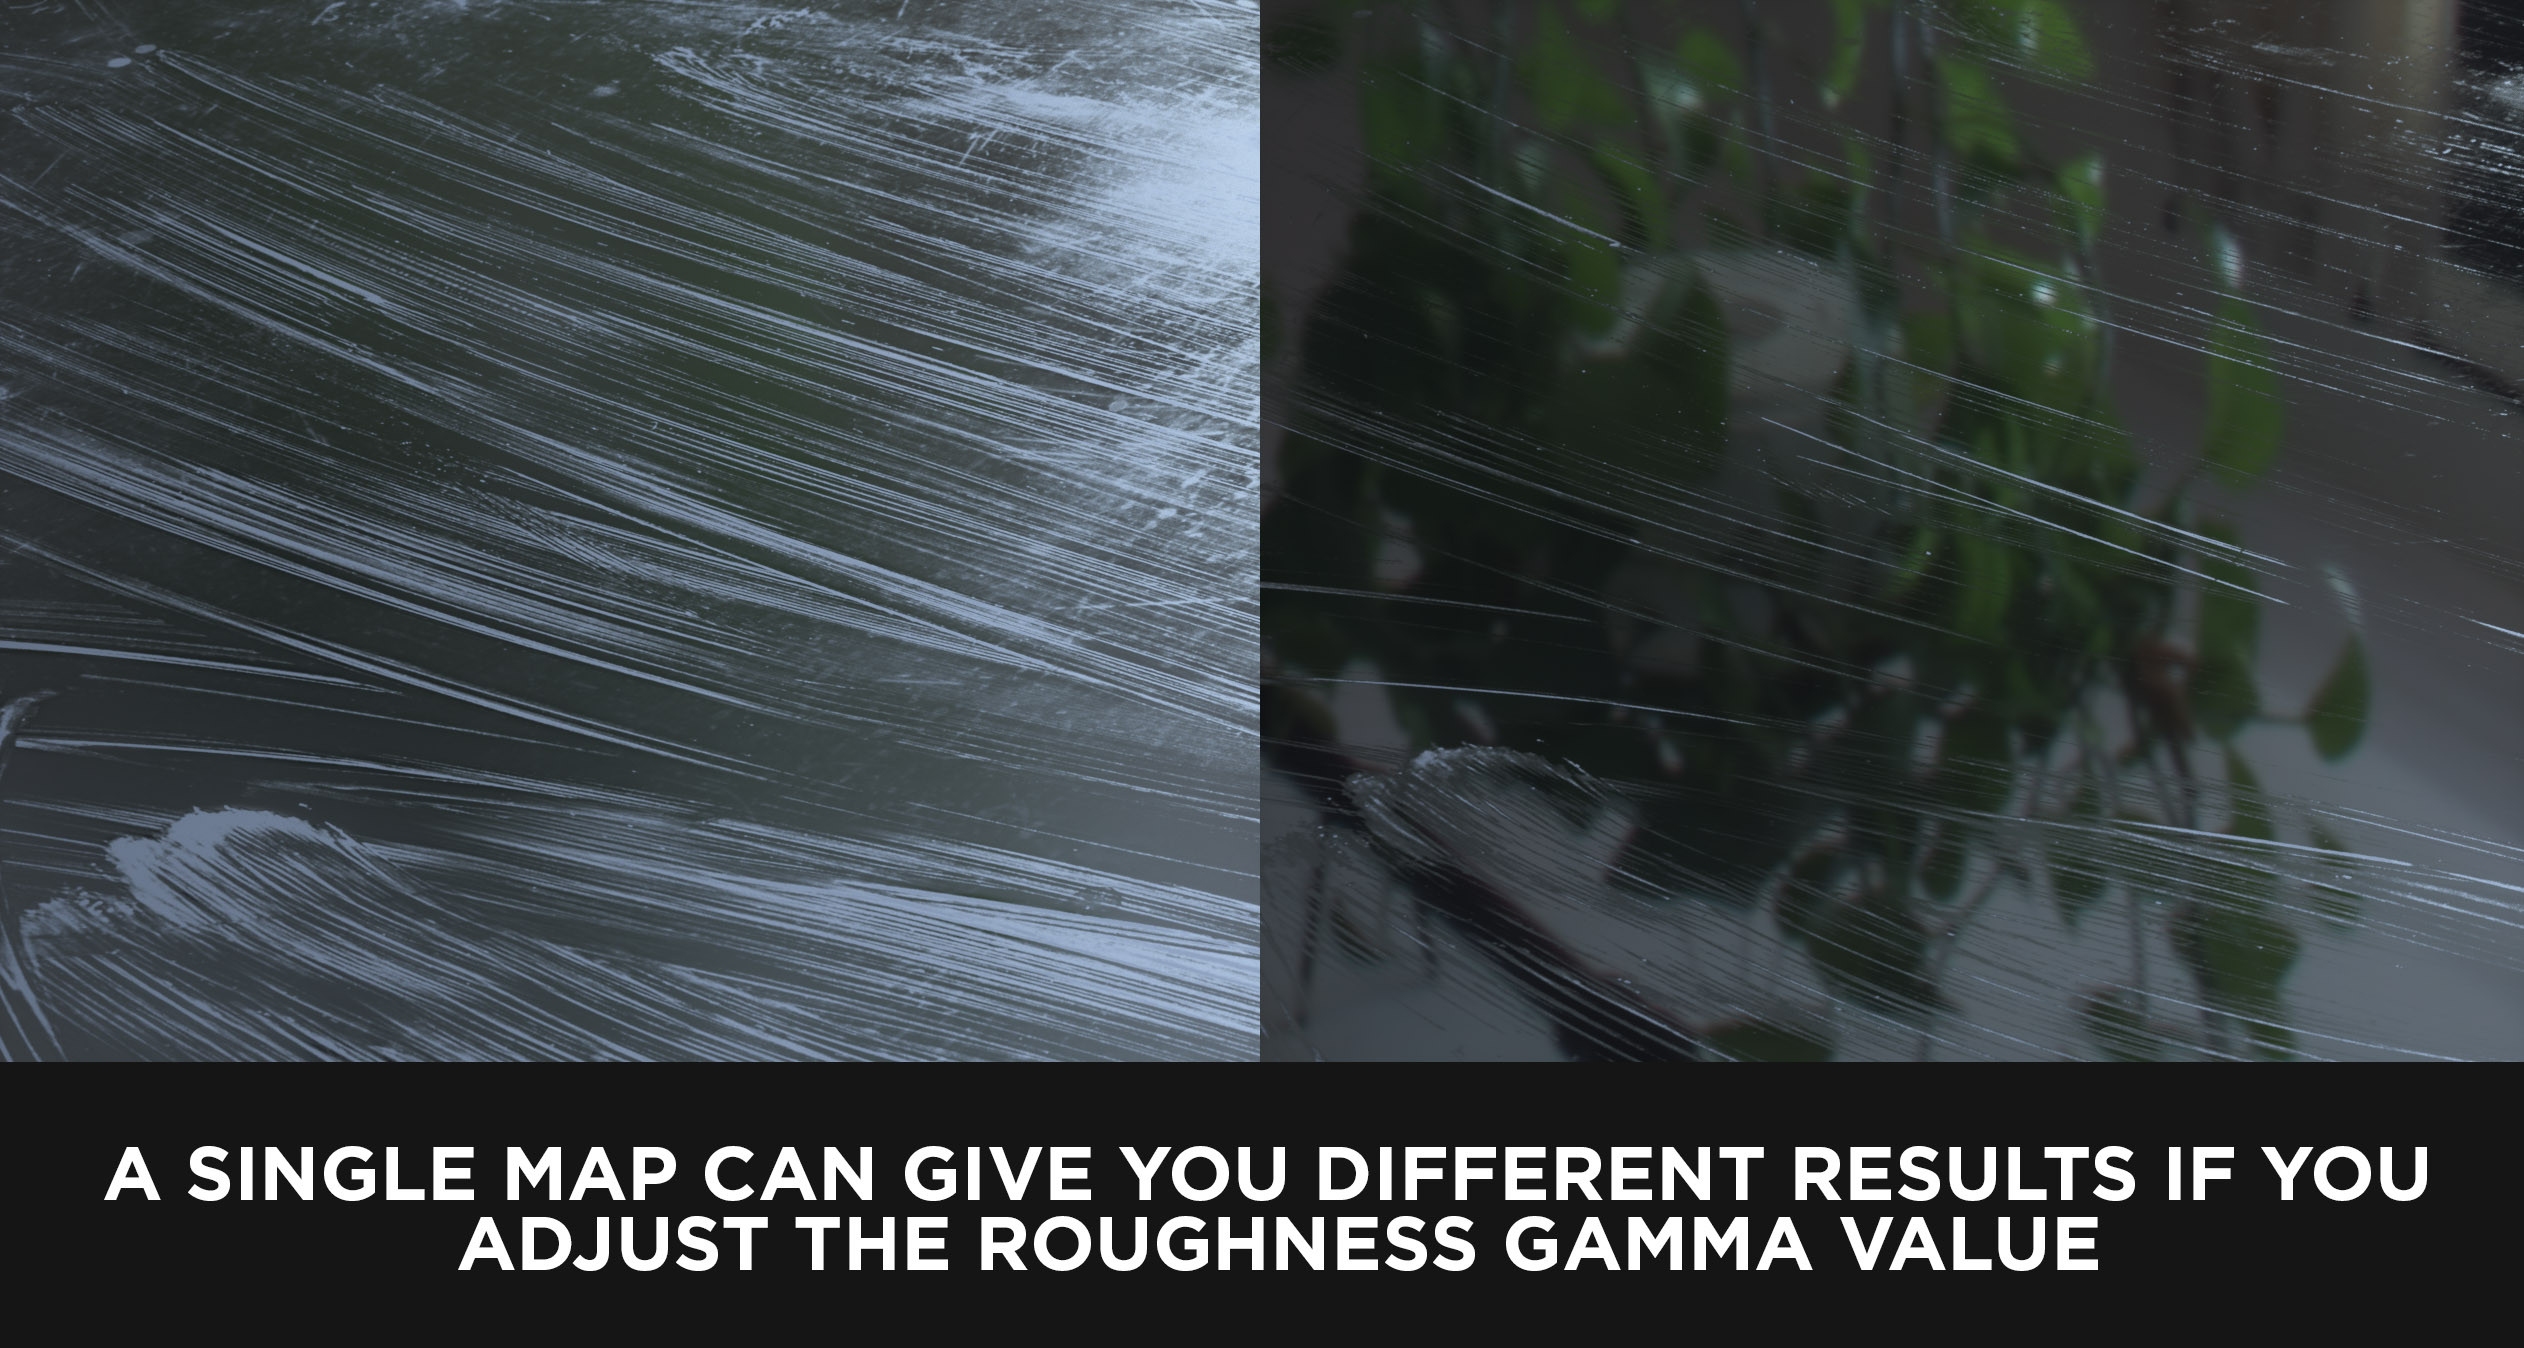 Adjust the gamma value to change the look and feel of the roughness maps. 